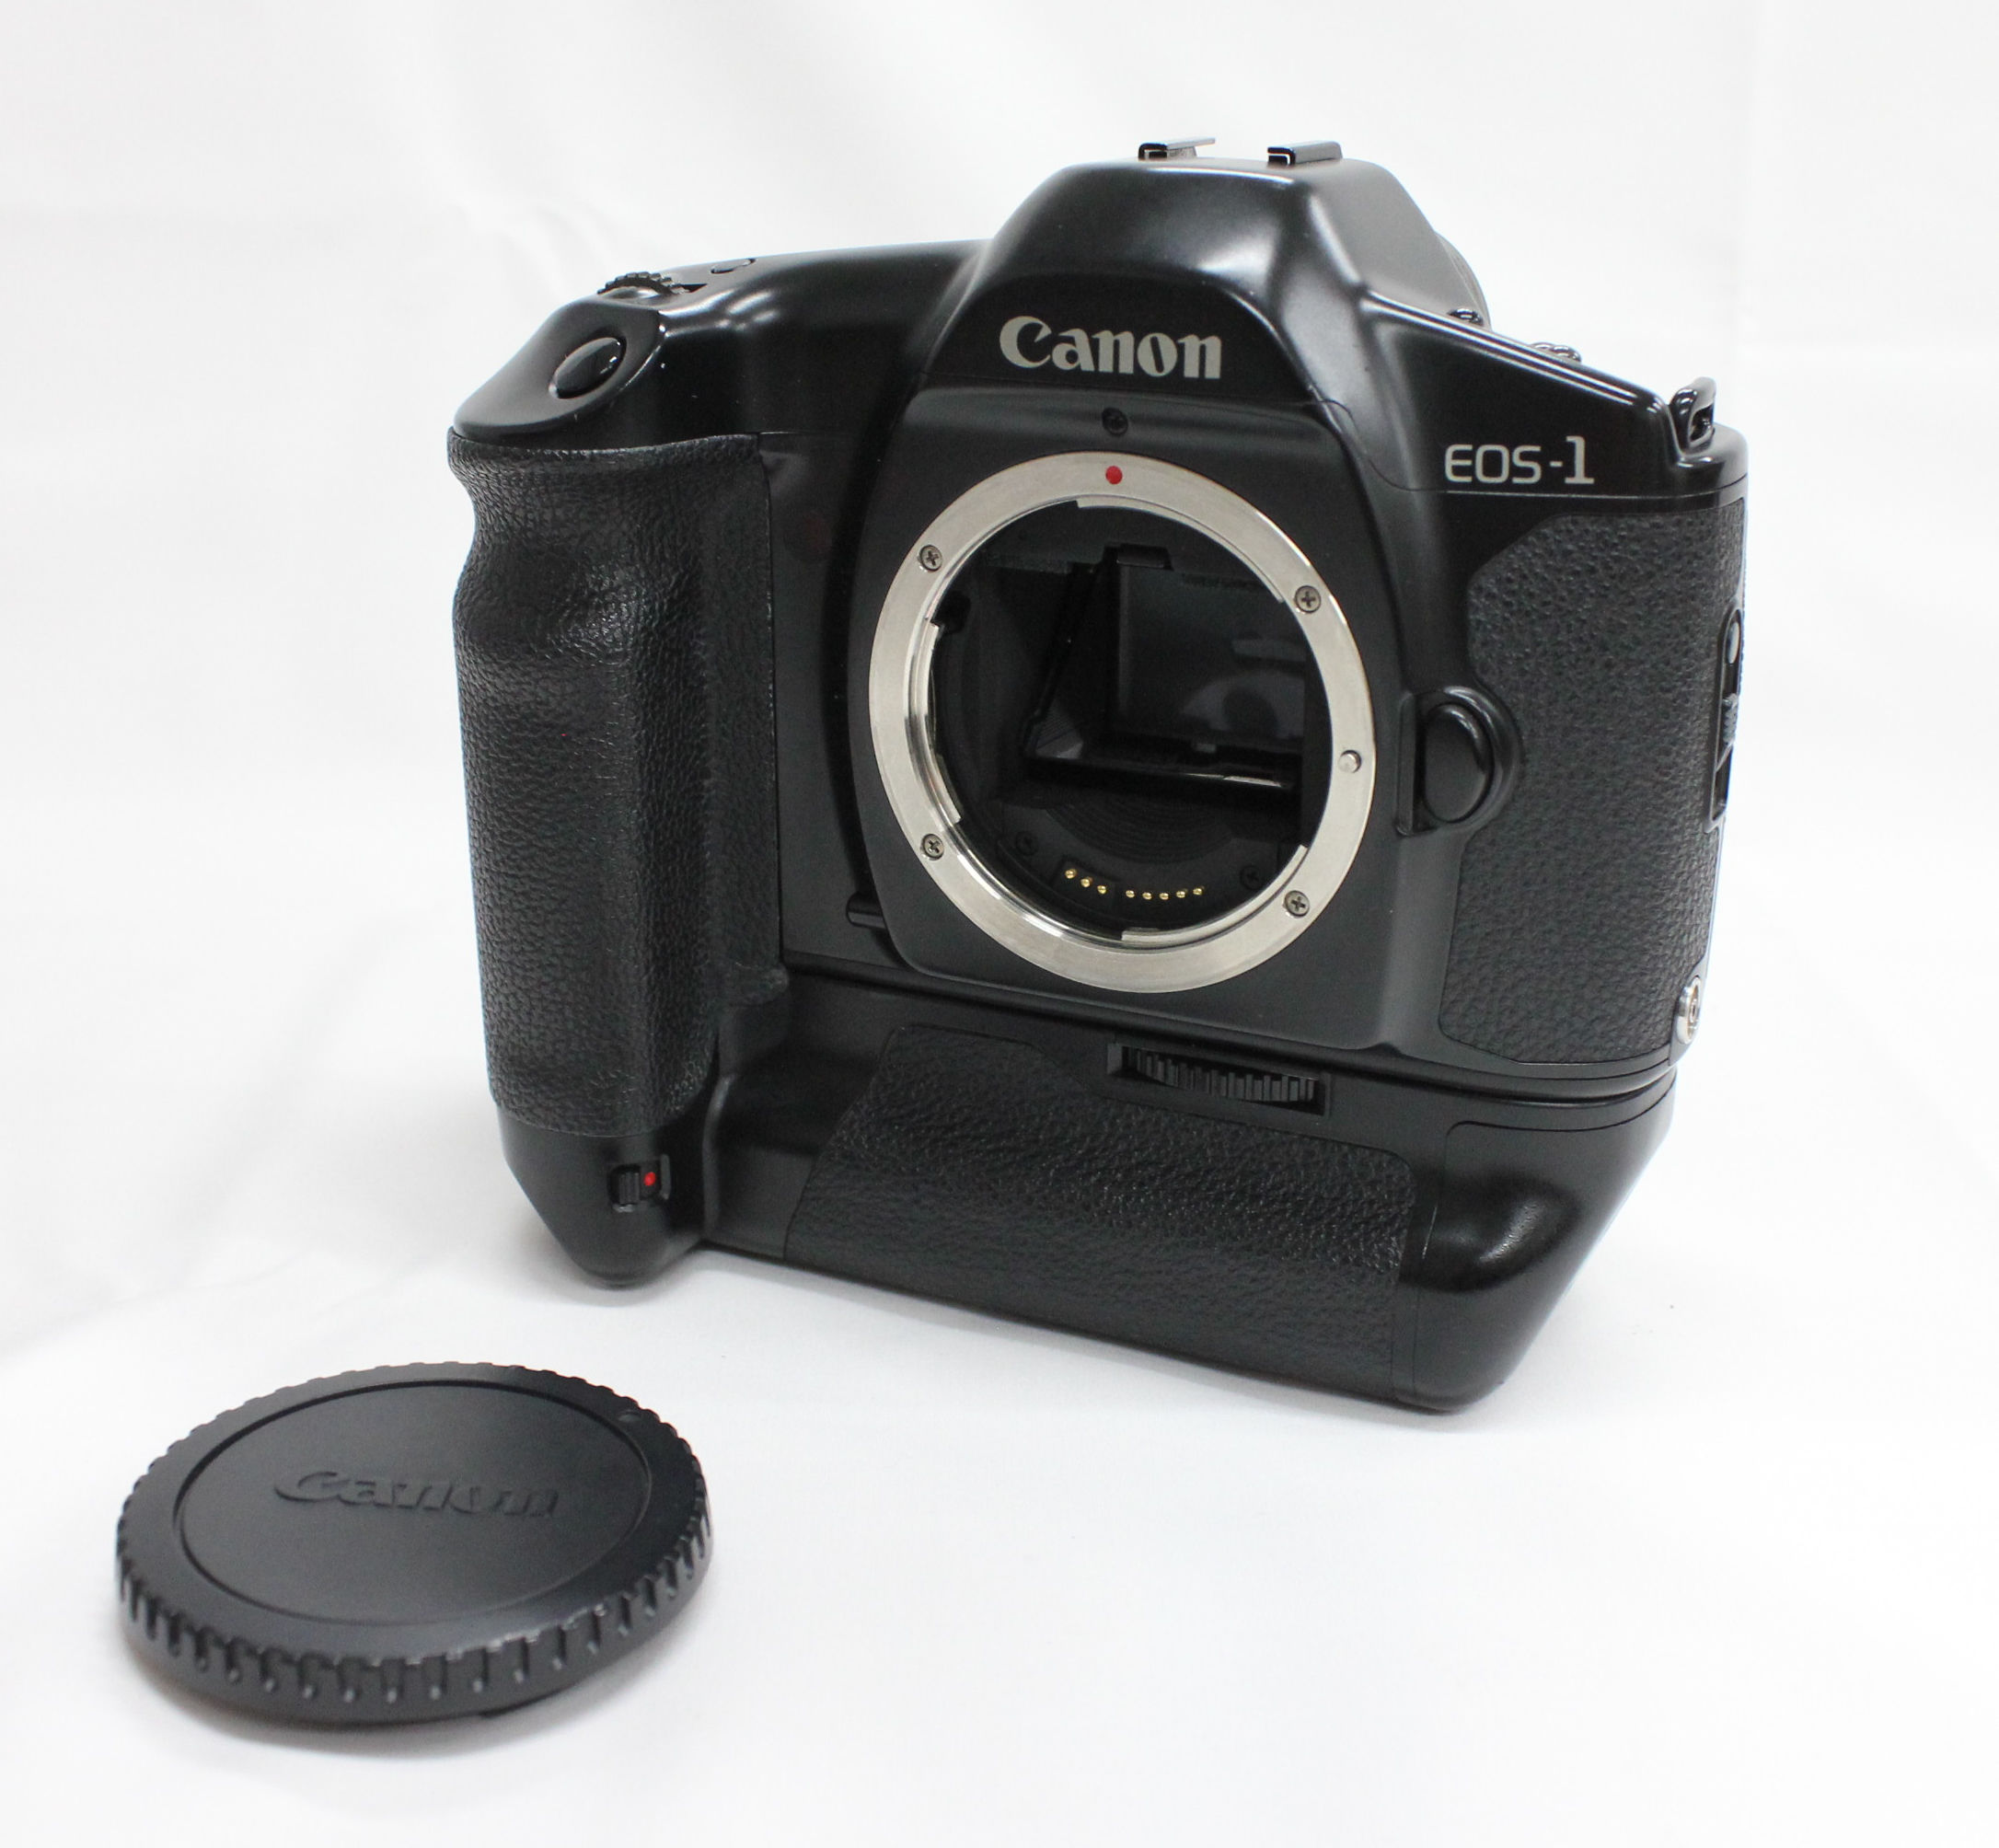 [Near Mint] Canon EOS-1 HS 35mm SLR Film Camera Body w/ Power Drive Booster E1 from Japan